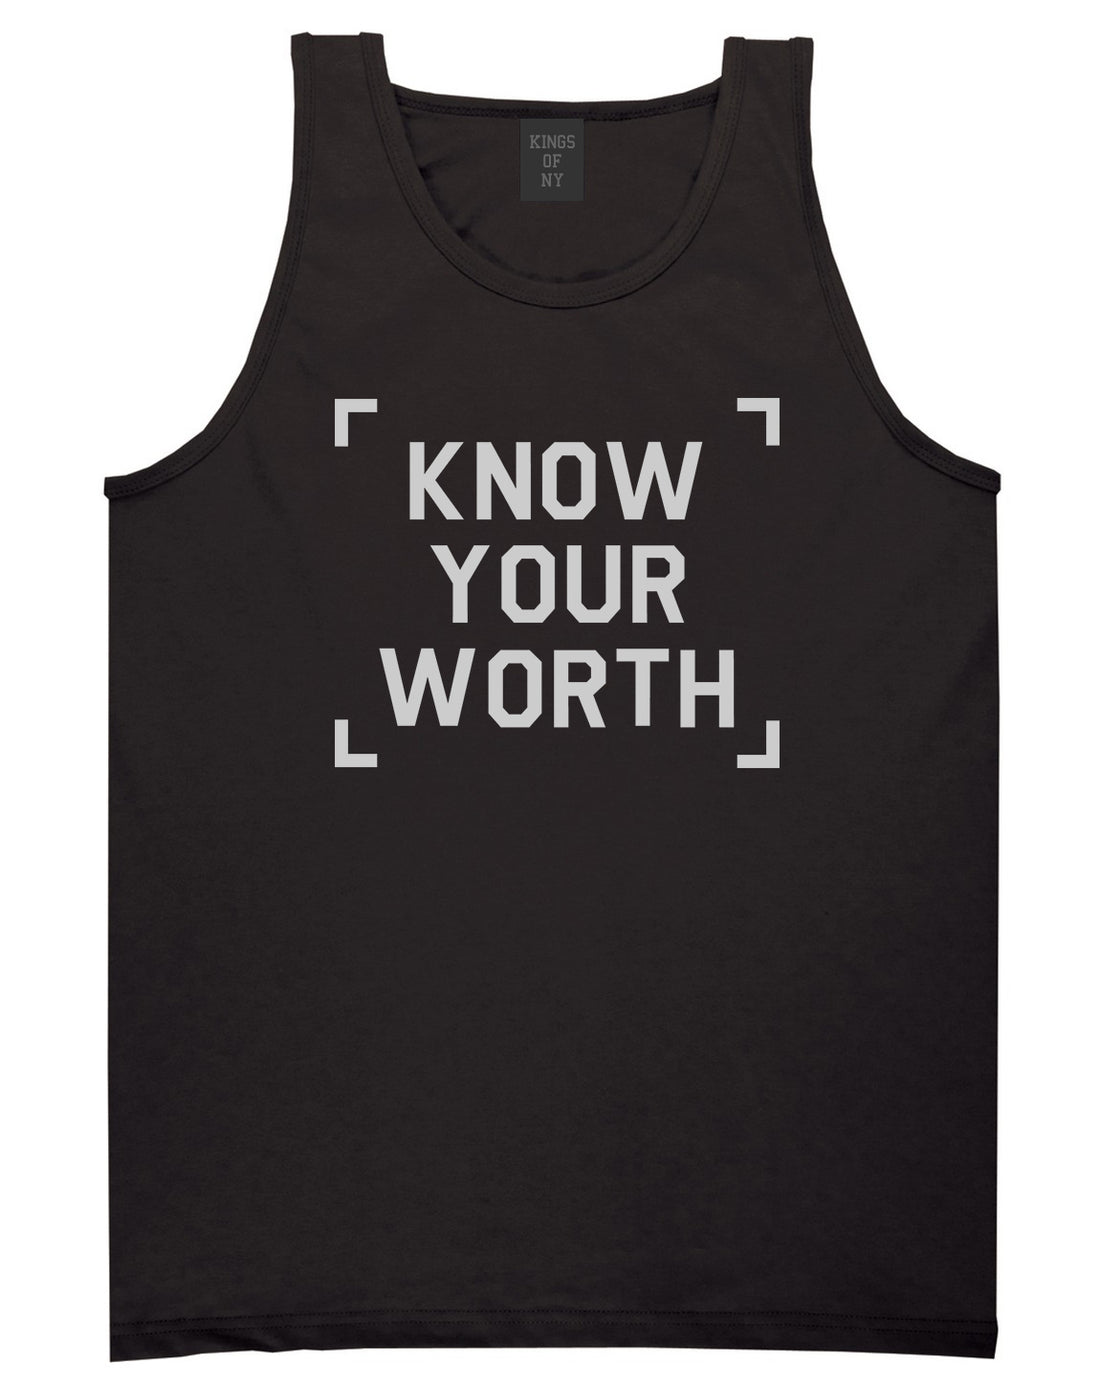 Know Your Worth Mens Tank Top Shirt Black by Kings Of NY